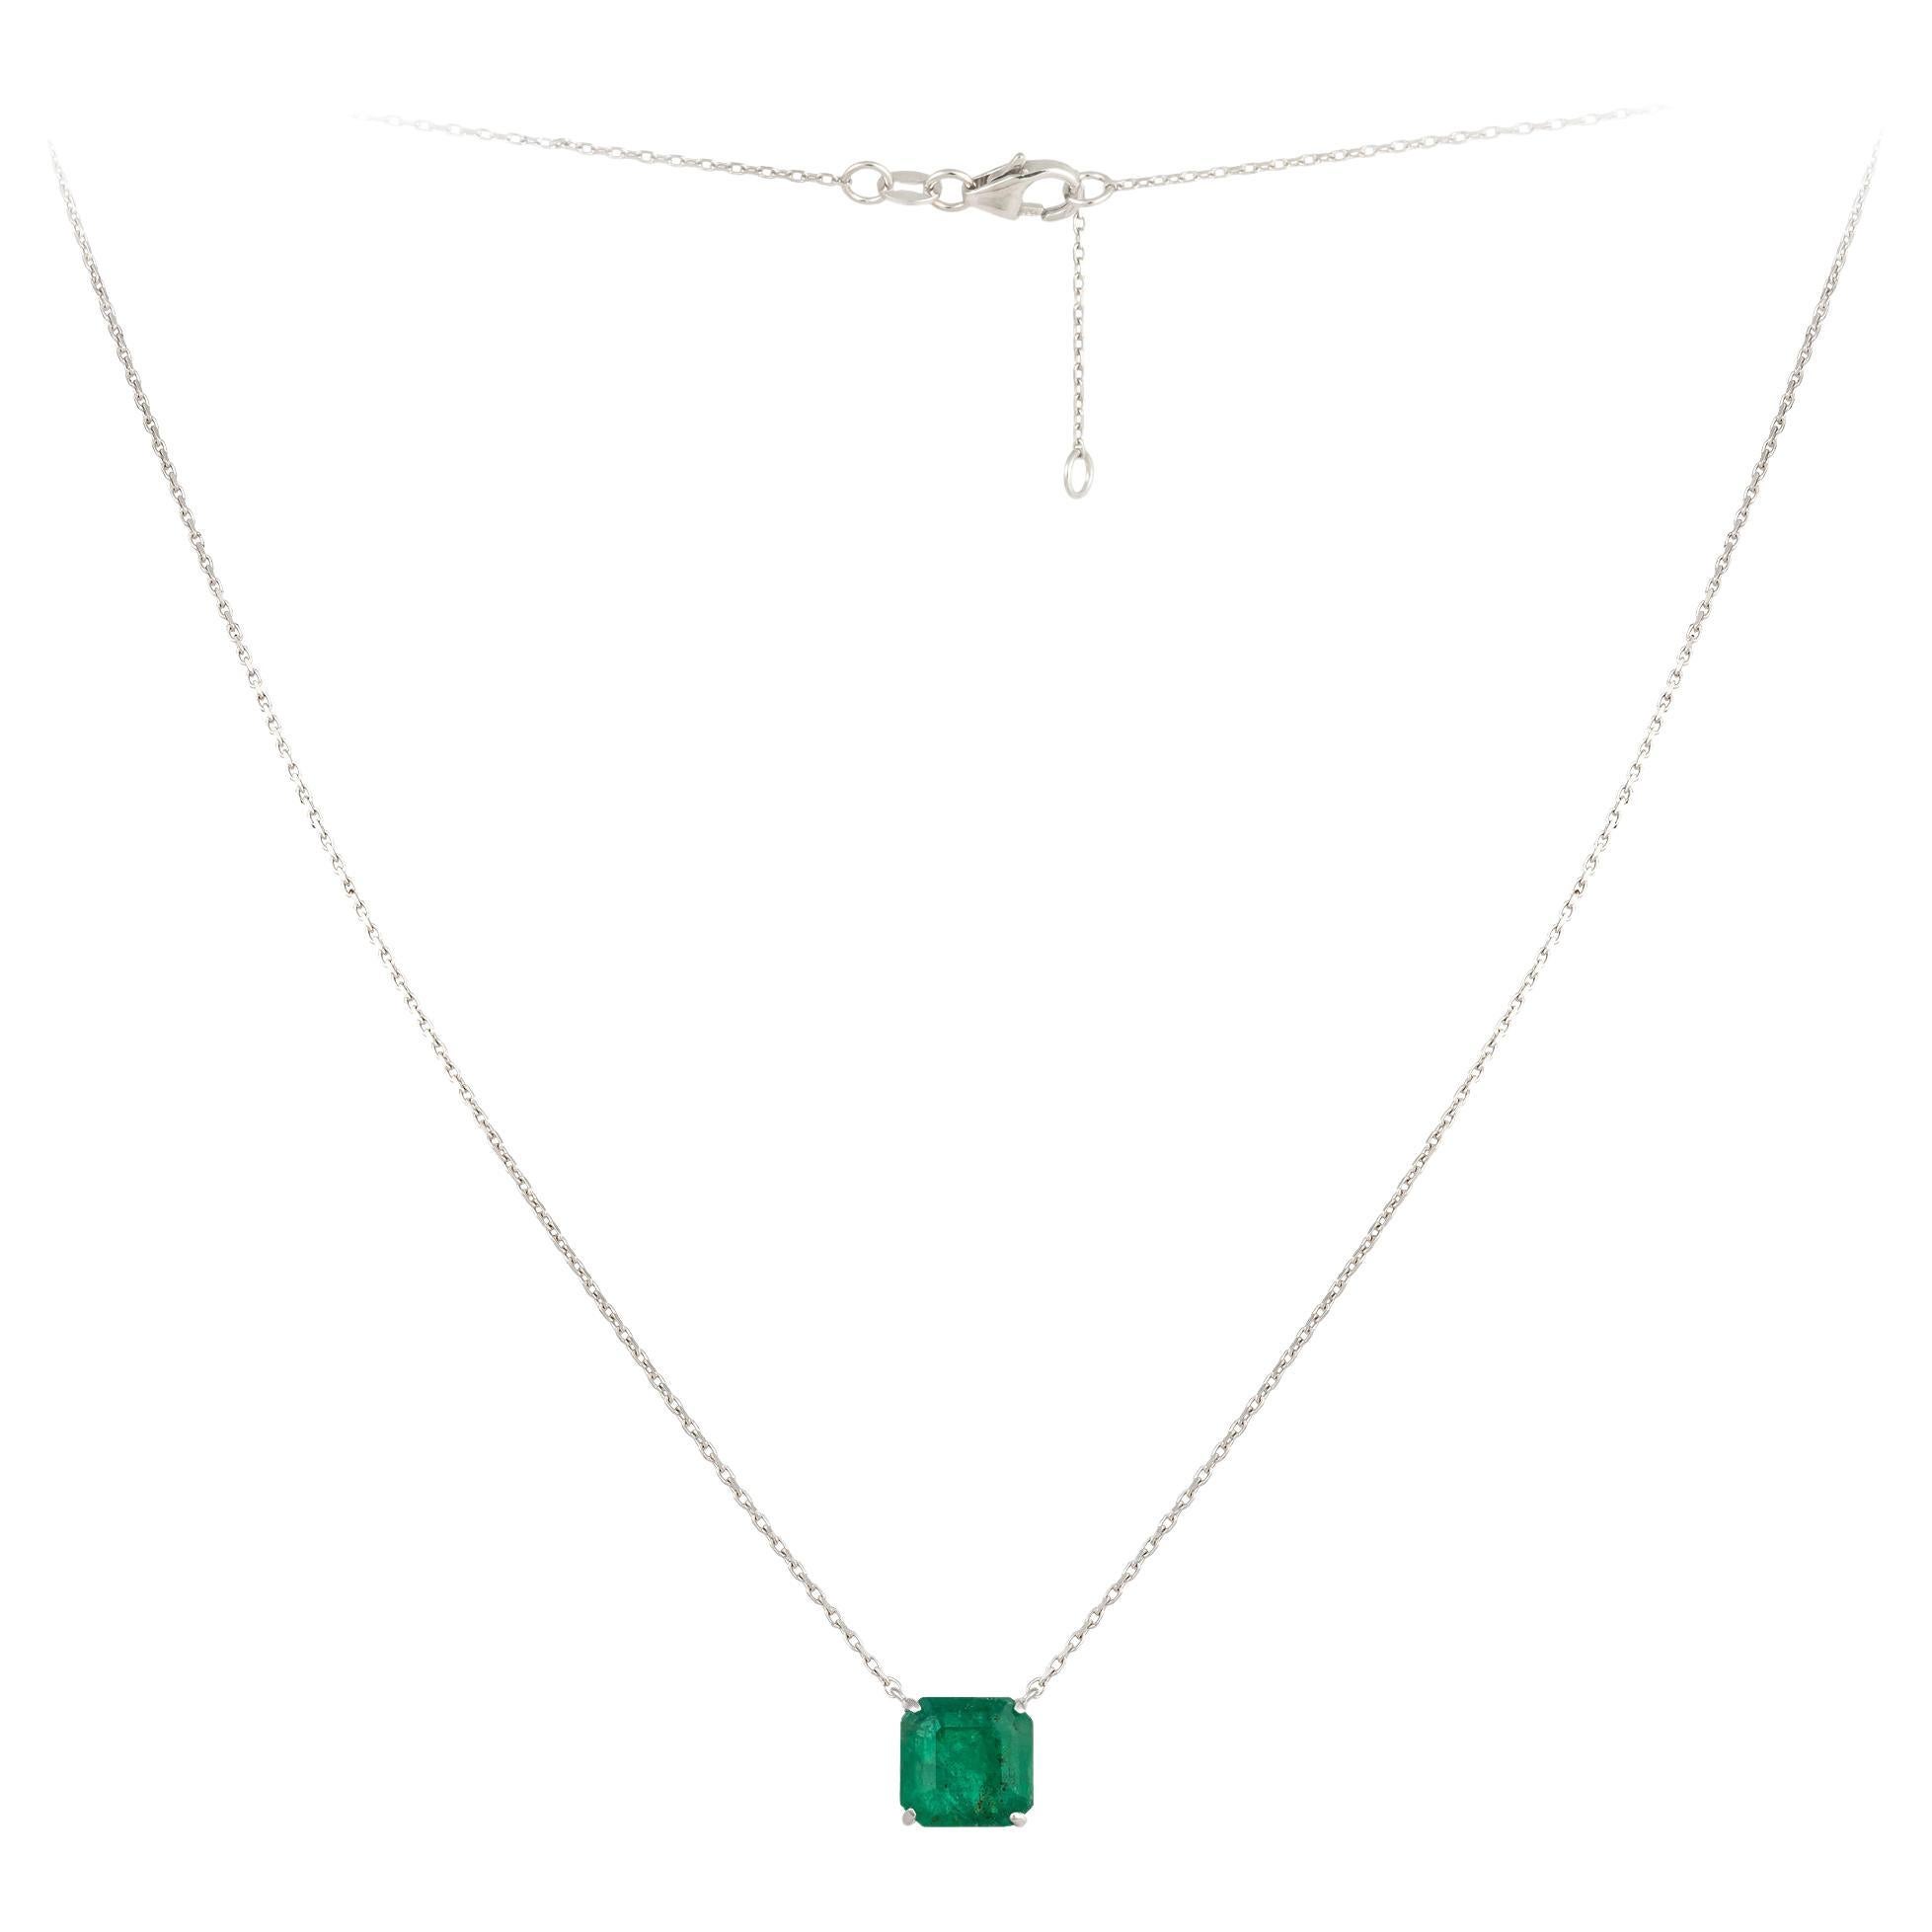 Every Day White Gold 18K Necklace Emerald Diamond For Her